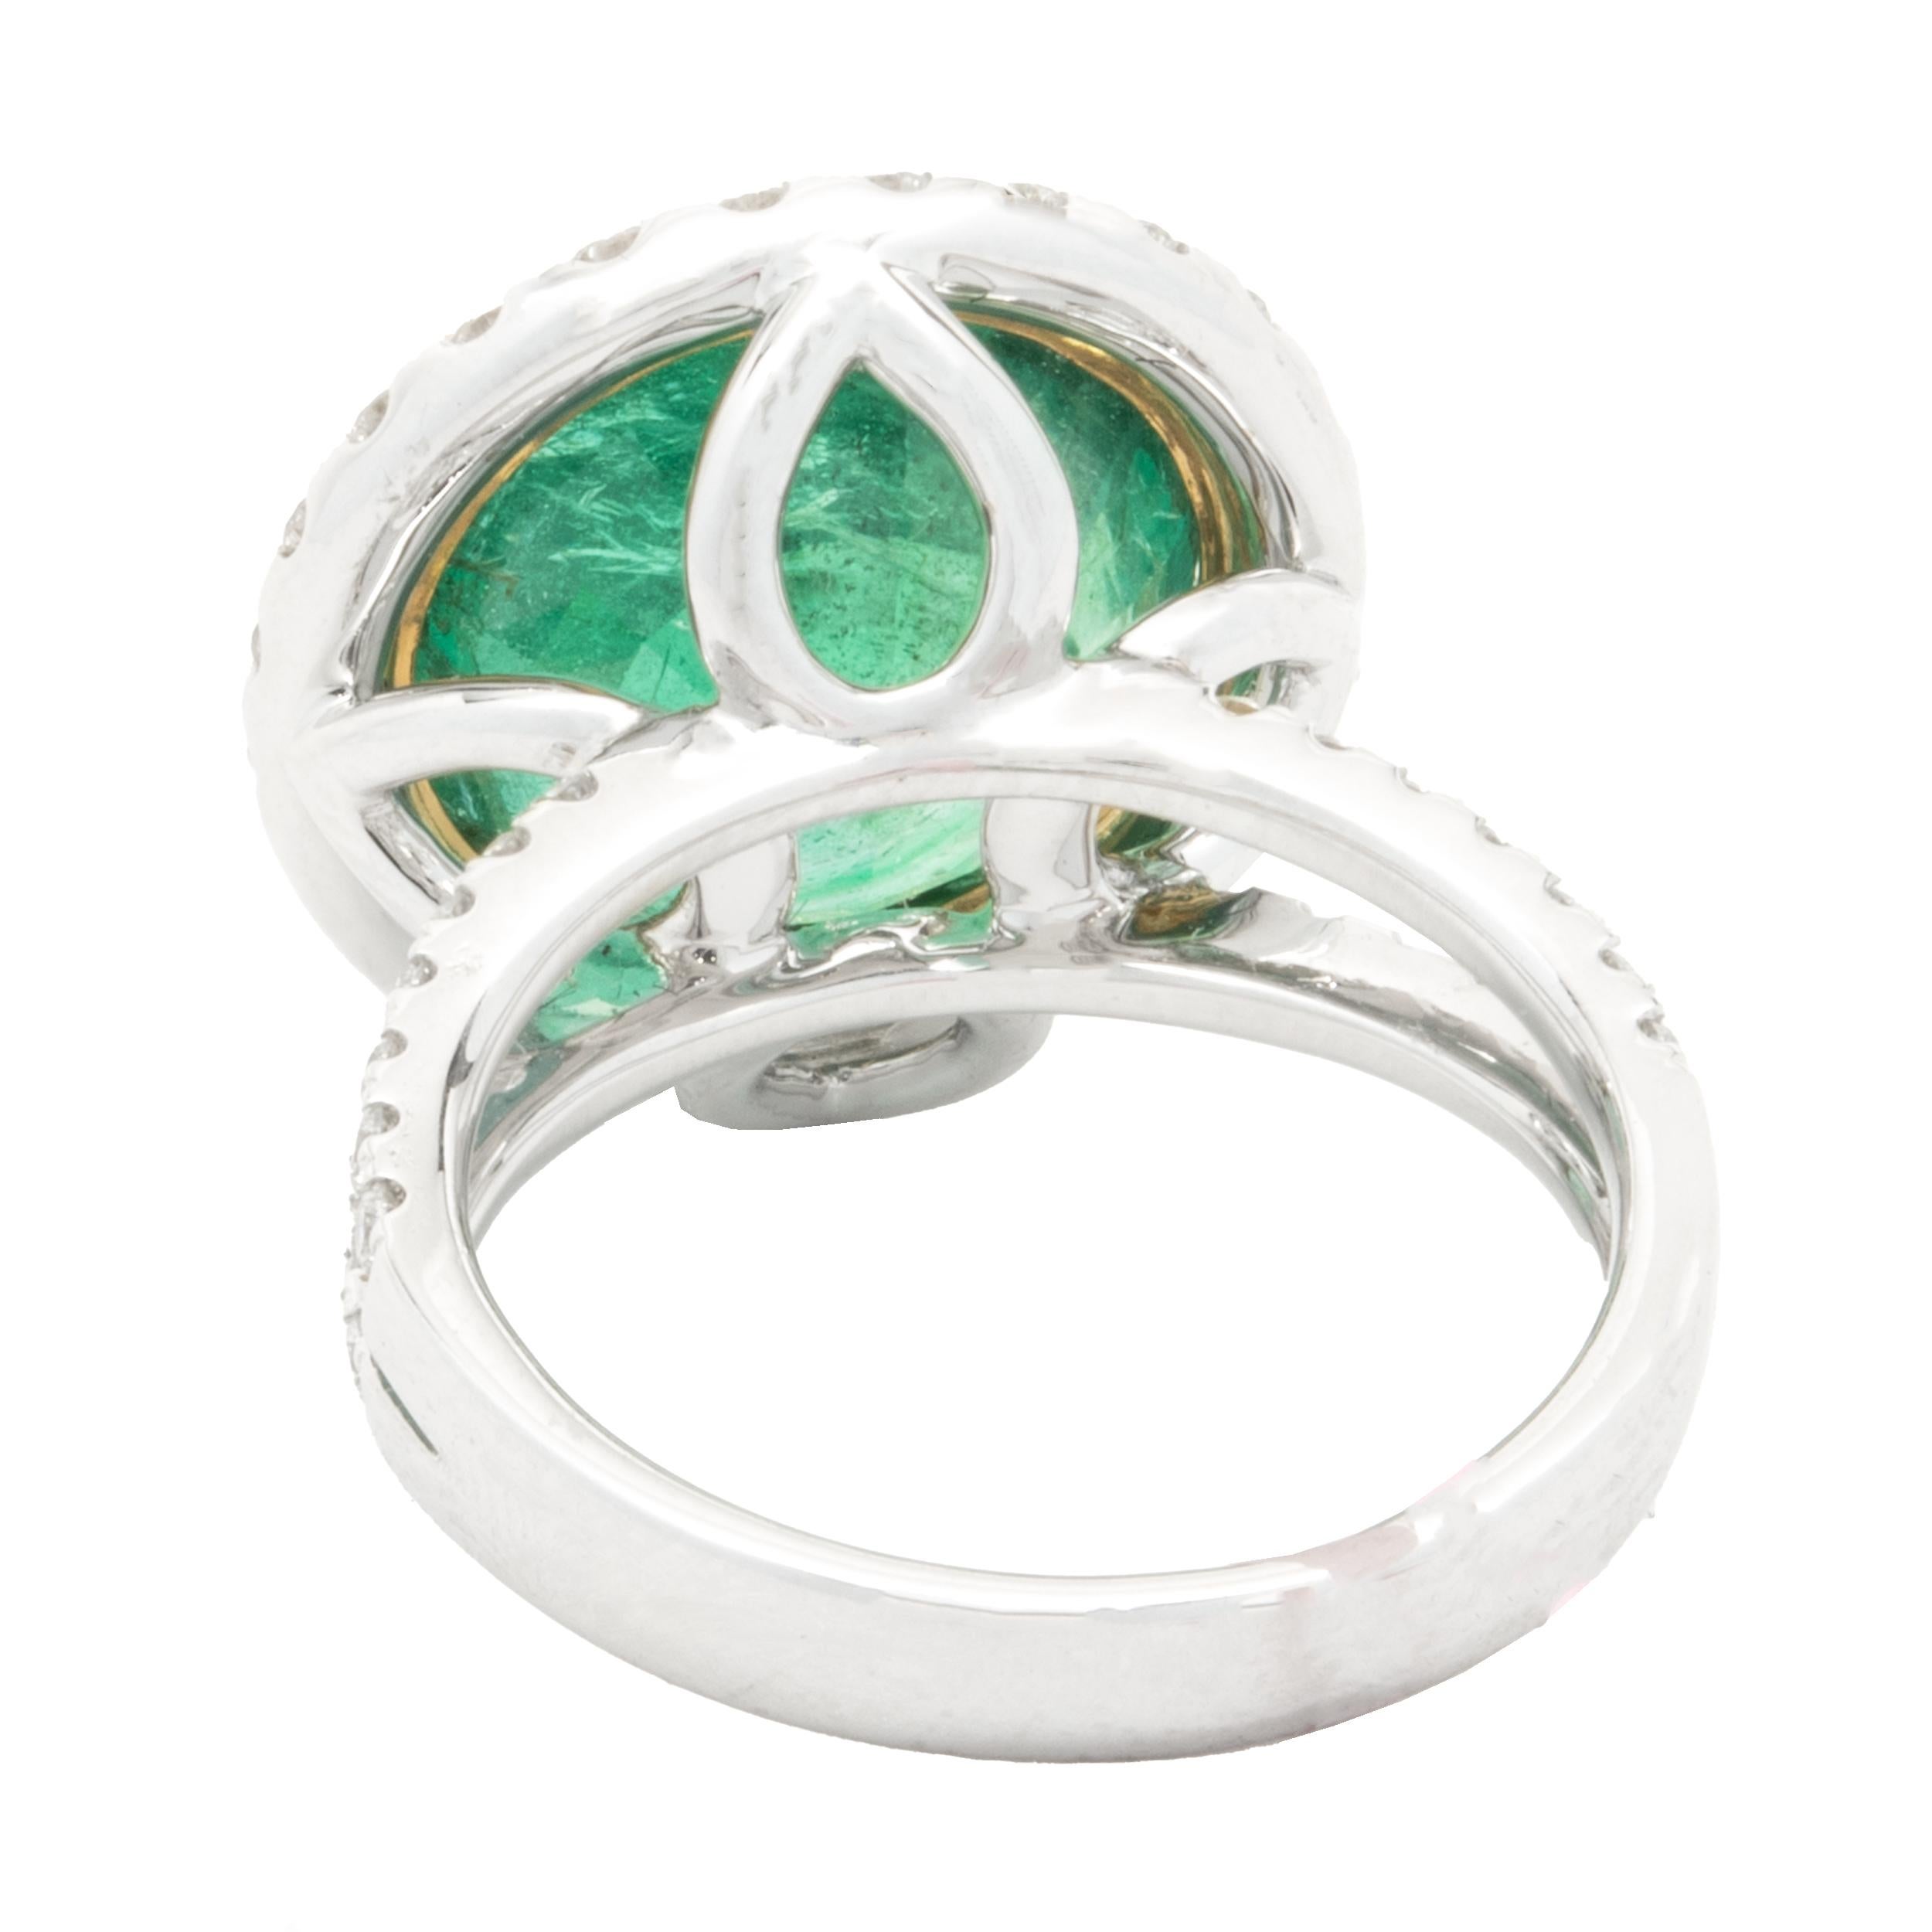 18 Karat Two Tone Emerald and Diamond Halo Ring In Excellent Condition For Sale In Scottsdale, AZ